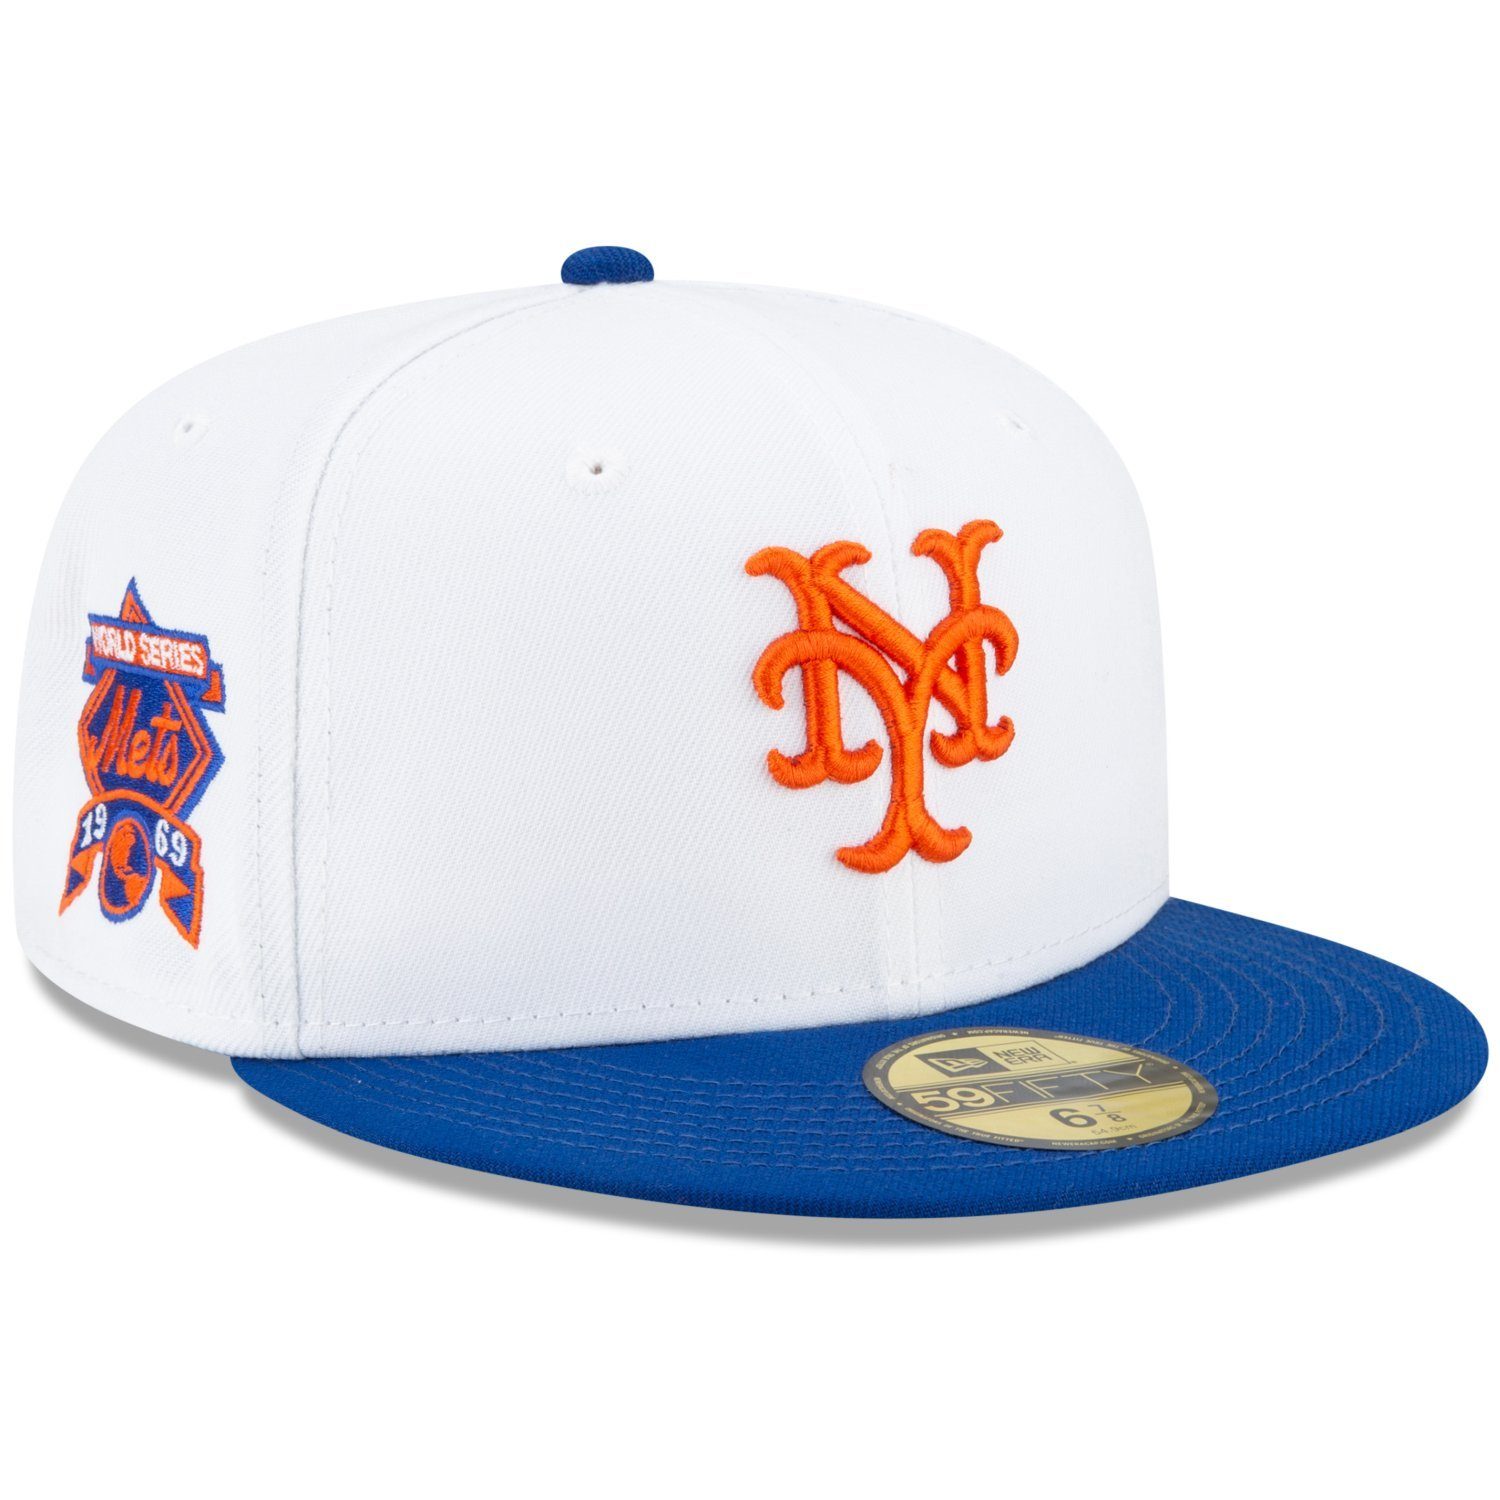 Fitted Mets Era Cap New 59Fifty York New WORLD 1969 SERIES